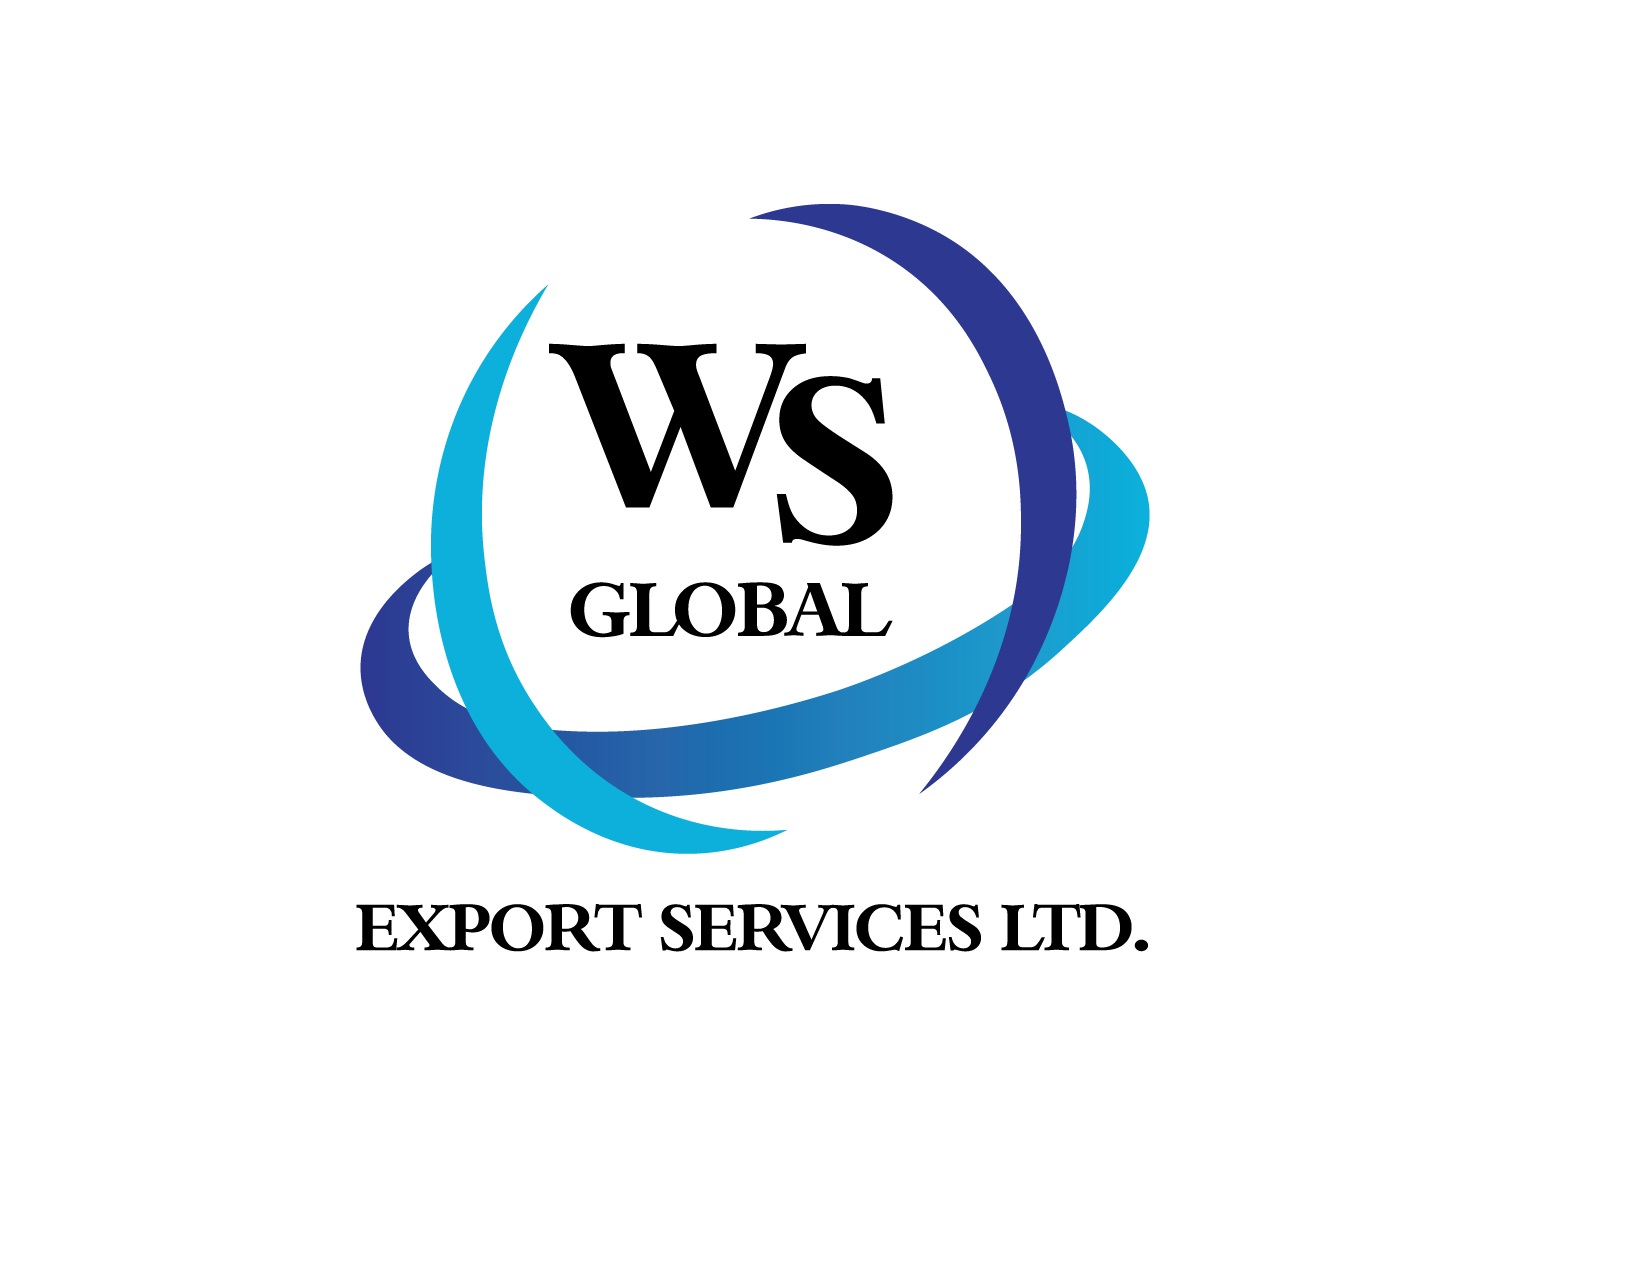 WS Global Export Services